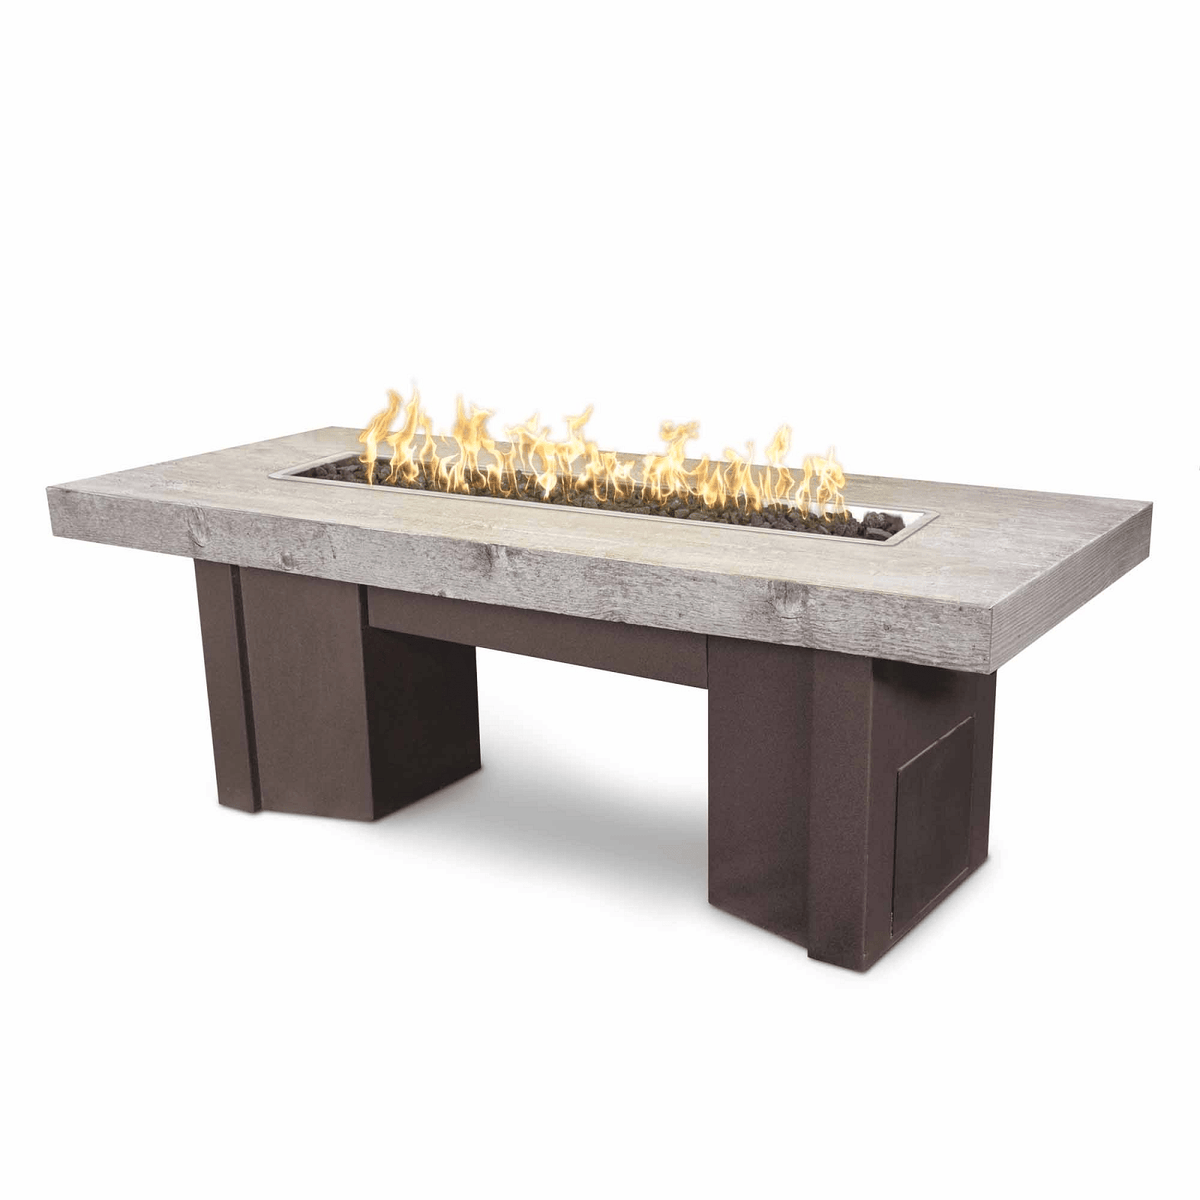 The Outdoor Plus Fire Features The Outdoor Plus 60&quot; Alameda Fire Table Wood Grain - 110V Plug &amp; Play Electronic Ignition / OPT-ALMWG60EKIT